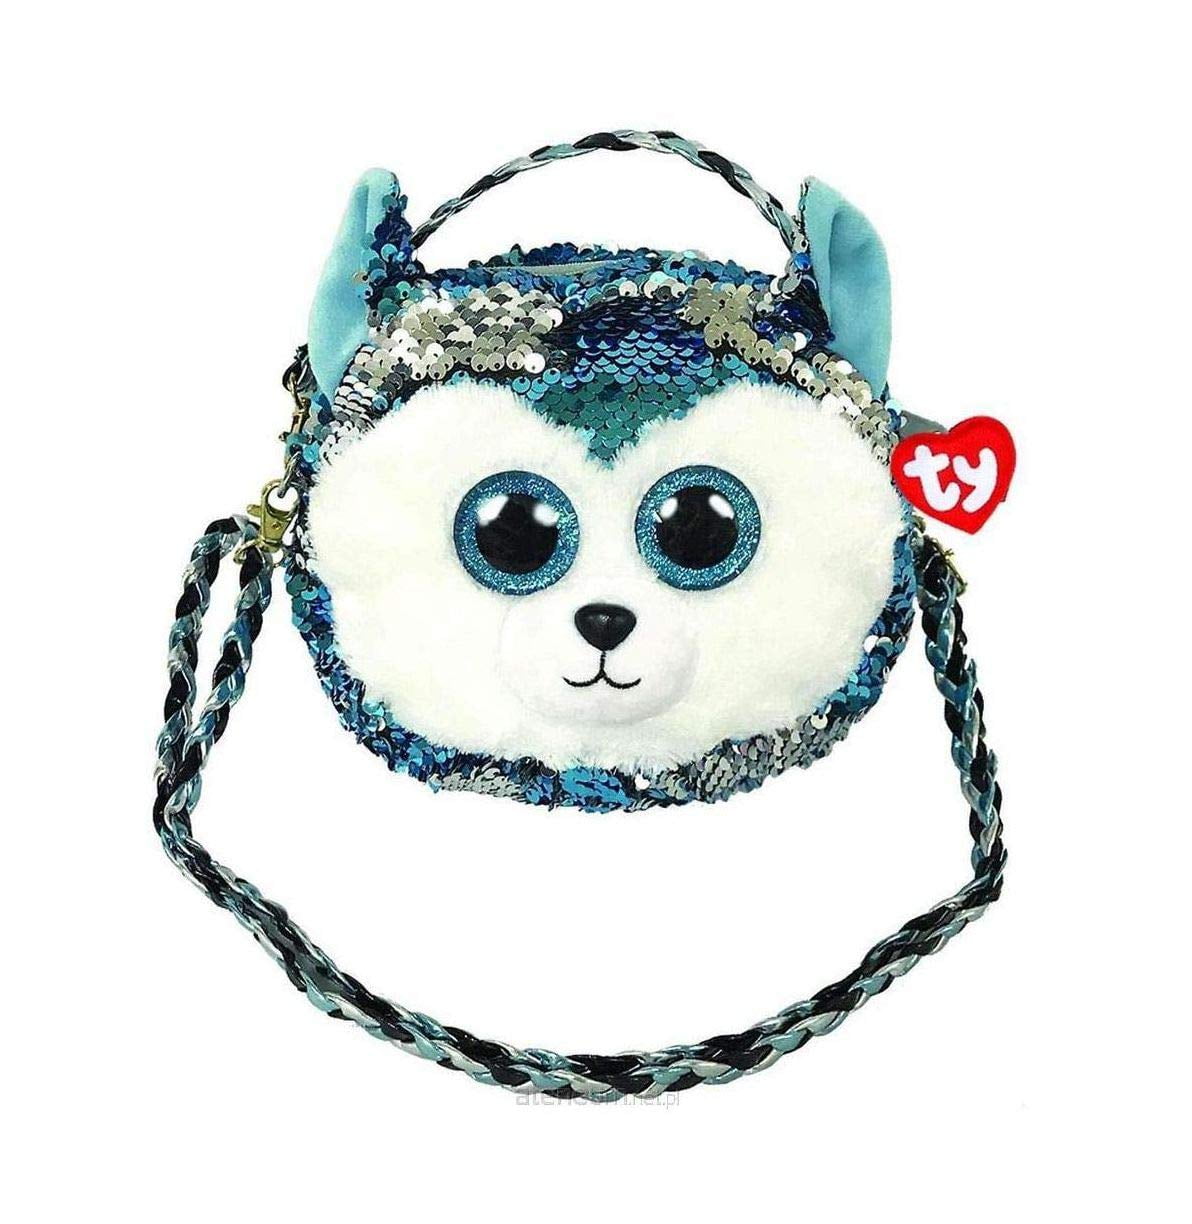 Details about   2019 TY Beanie Boos FASHION GEAR Changing Sequins WHIMSY Accessory Bag/Makeup 